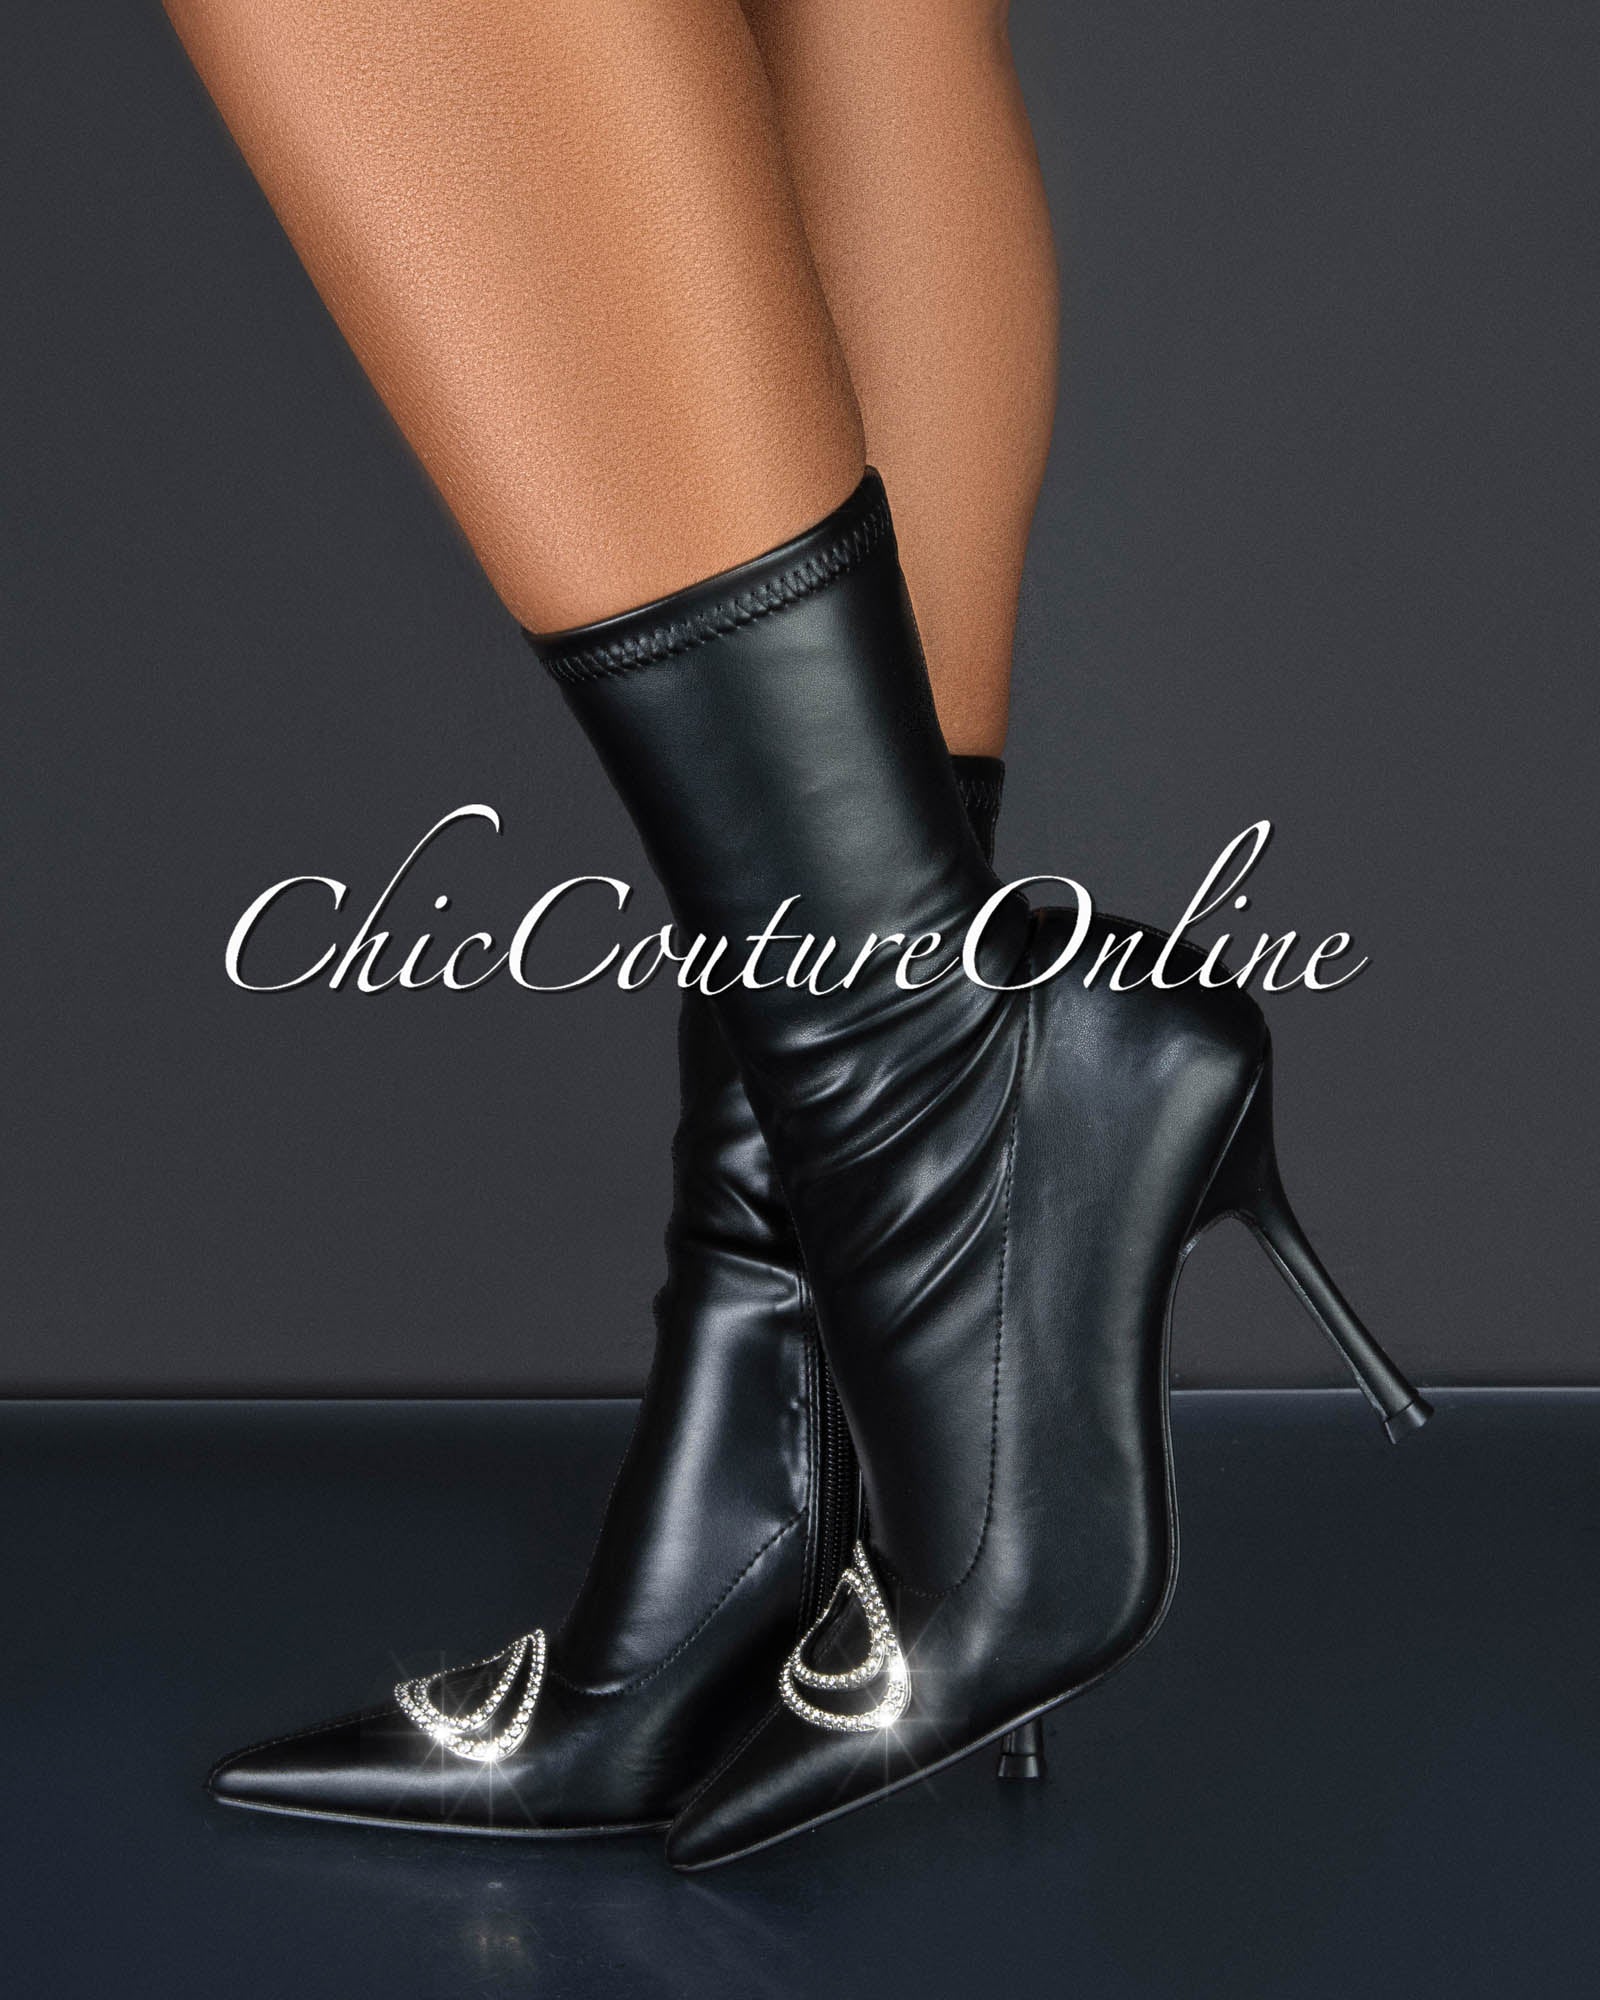 *Bouncy Black Faux Leather Rhinestones Accent Booties